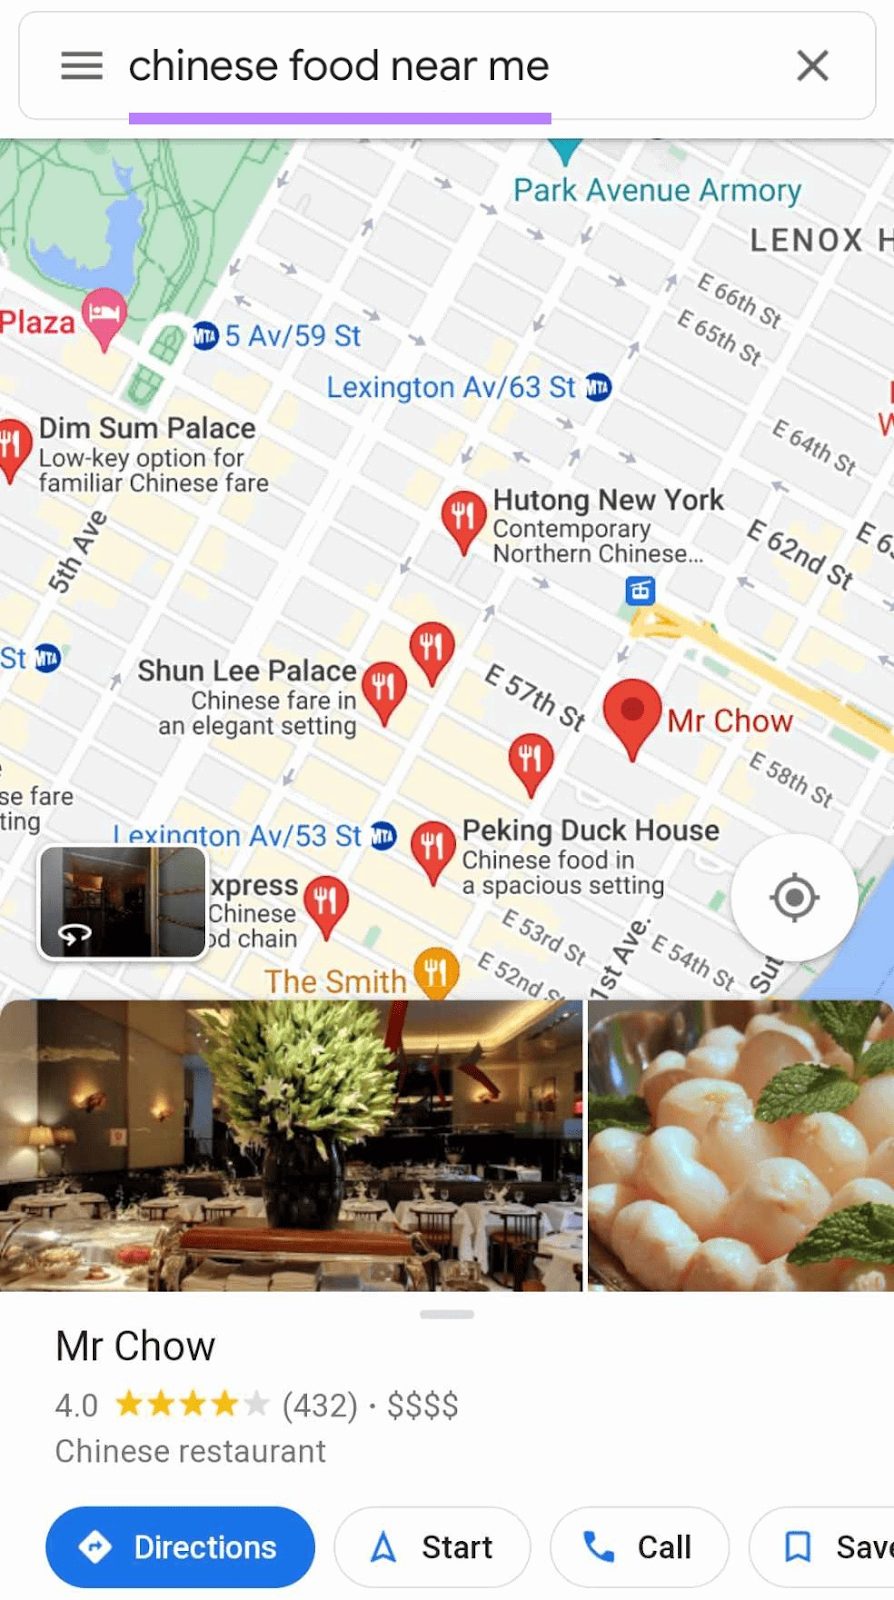 Google Maps results for "chinese food near me"